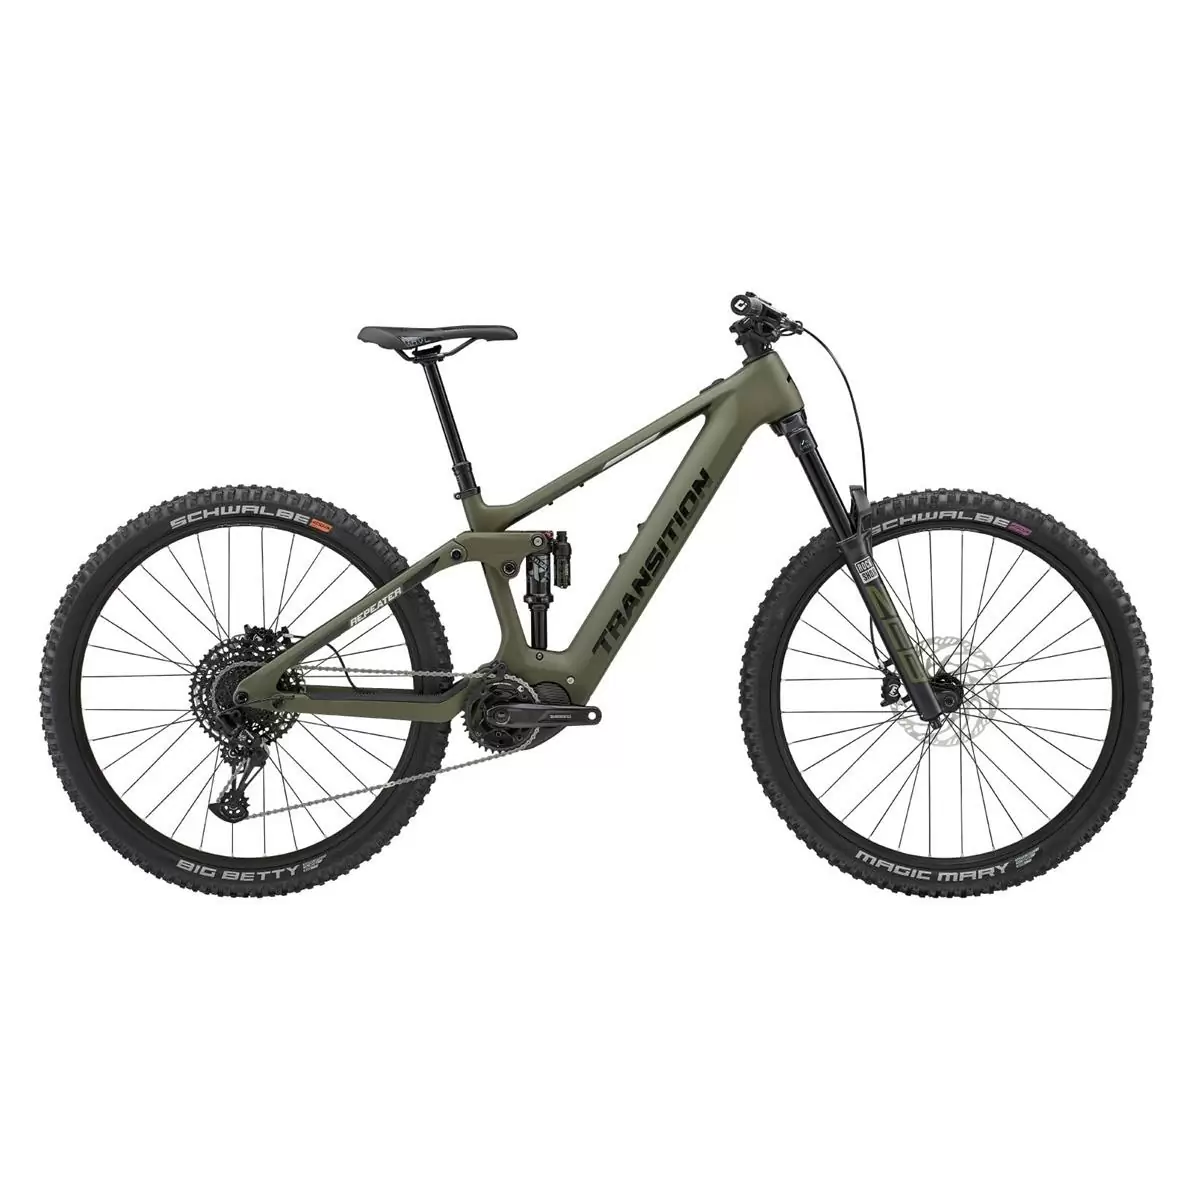 Repeater Carbon NX 29'' 160mm 12v 630Wh Shimano EP8 Mossy Green Taglia S - image